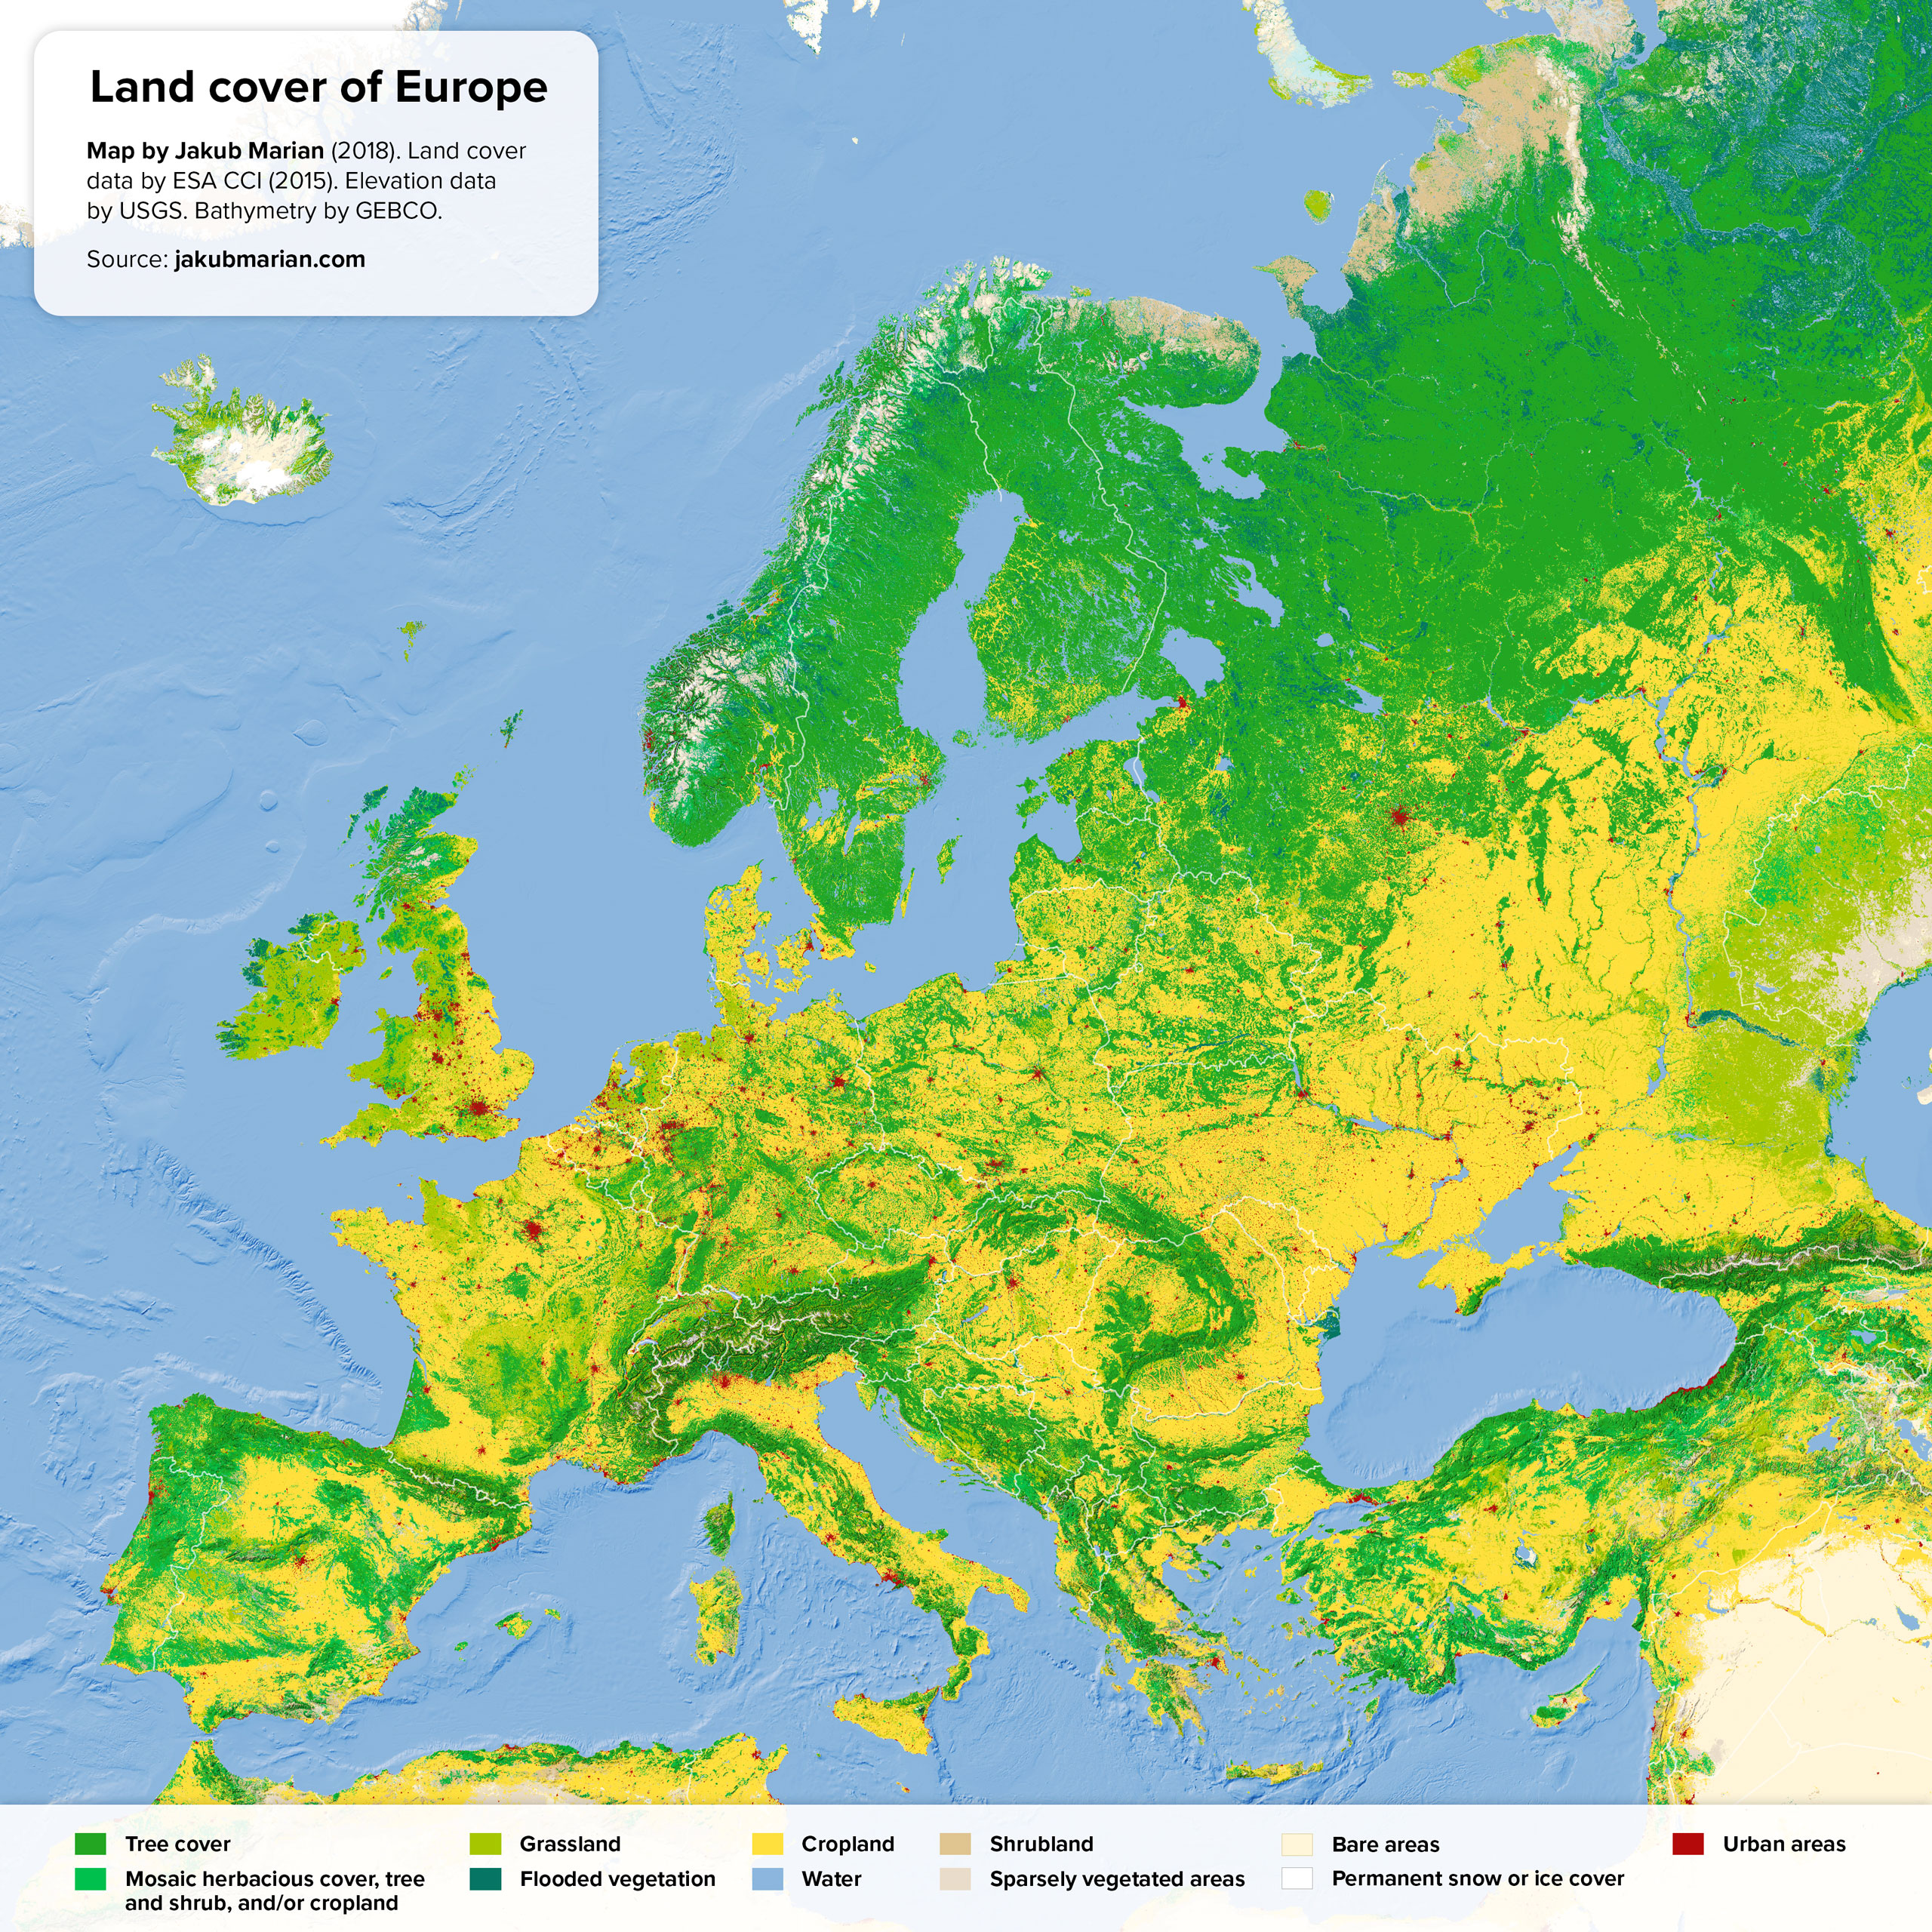 Land cover of Europe